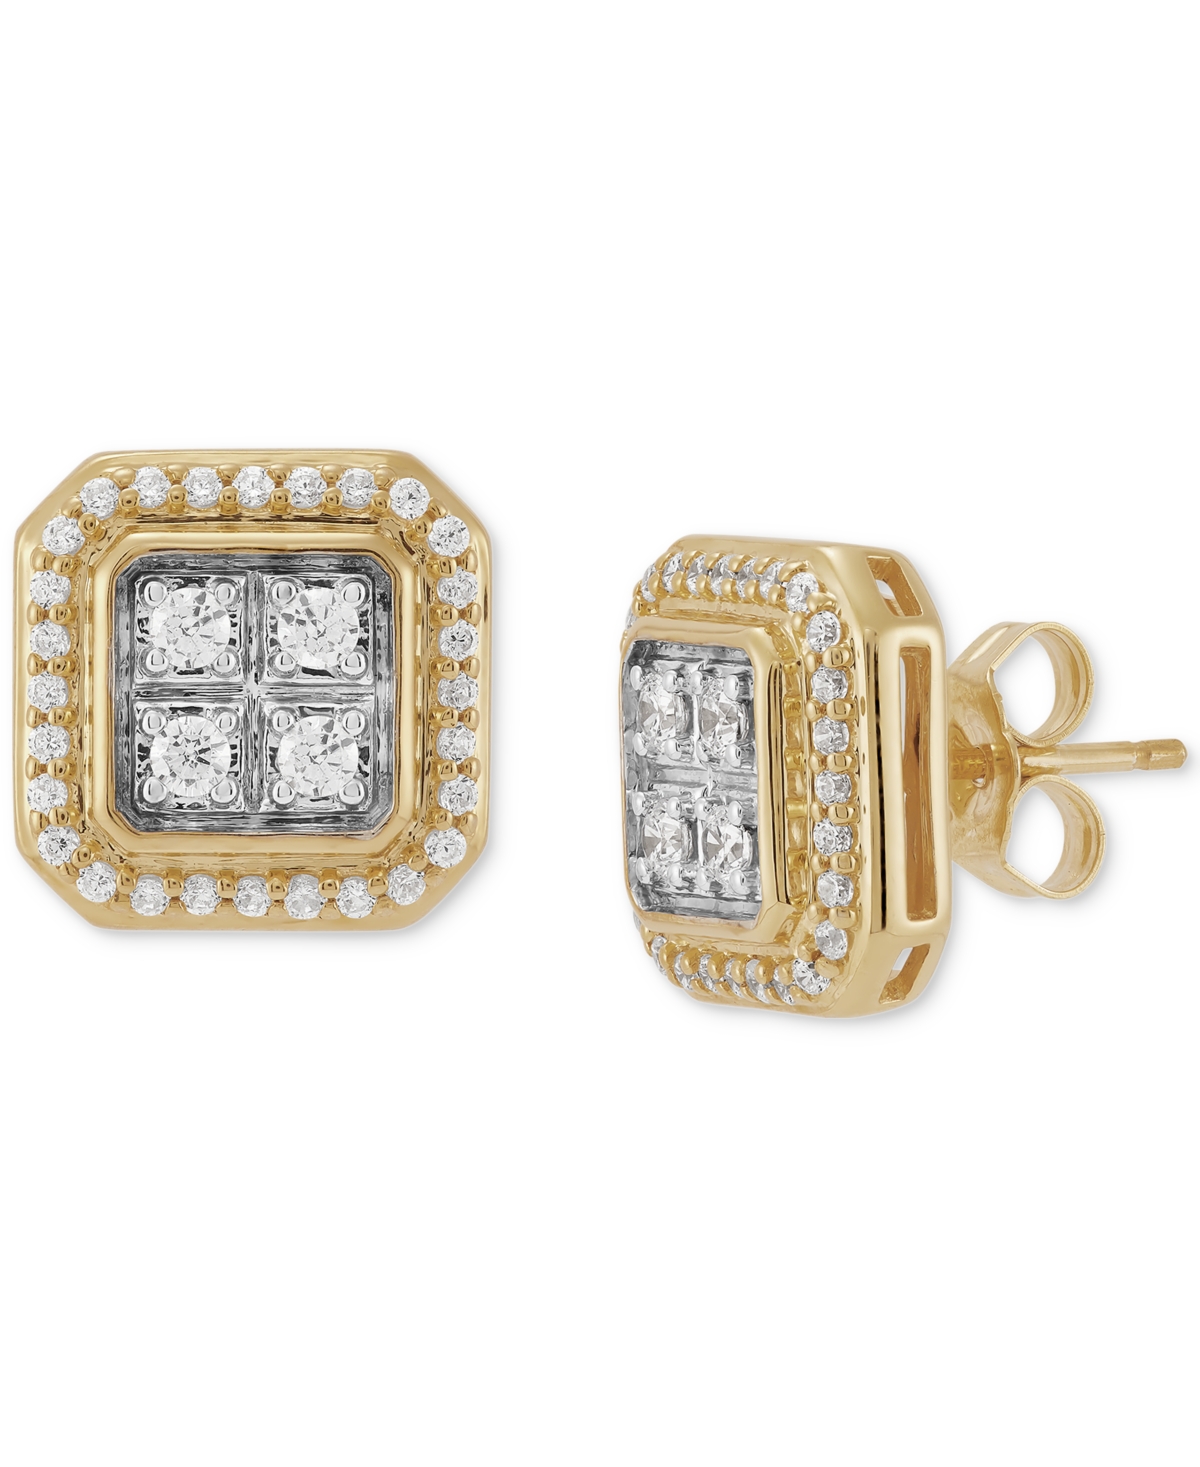 Men's Lab Grown Diamond Halo Square Cluster Stud Earrings (1/2 ct. t.w.) in 10k Gold - Yellow Gold